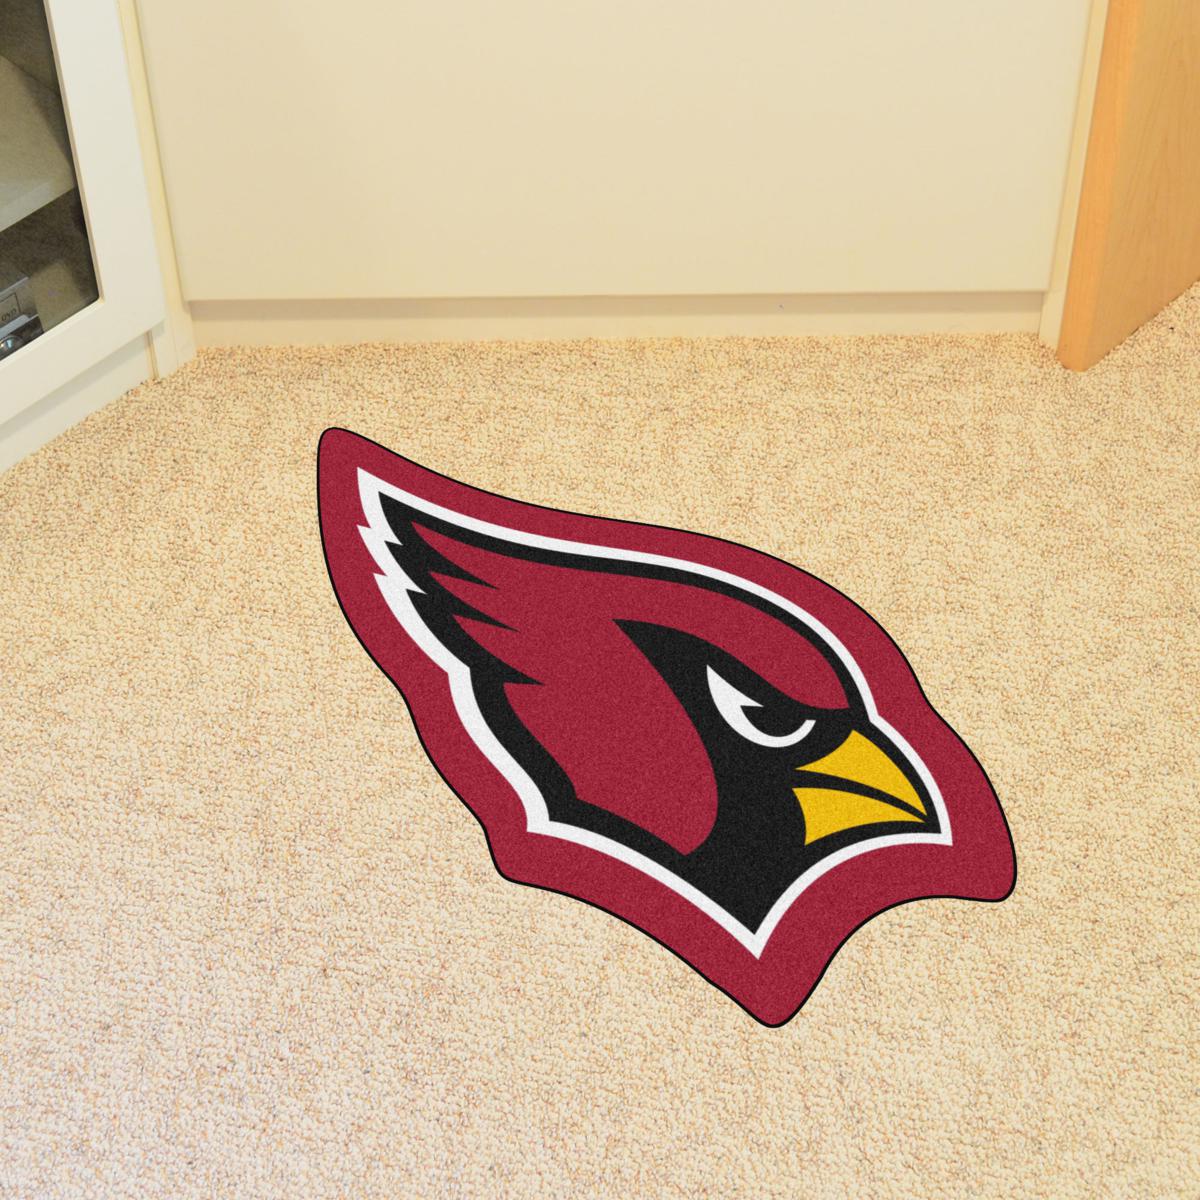 Officially Licensed NFL Mascot Rug - Arizona Cardinals